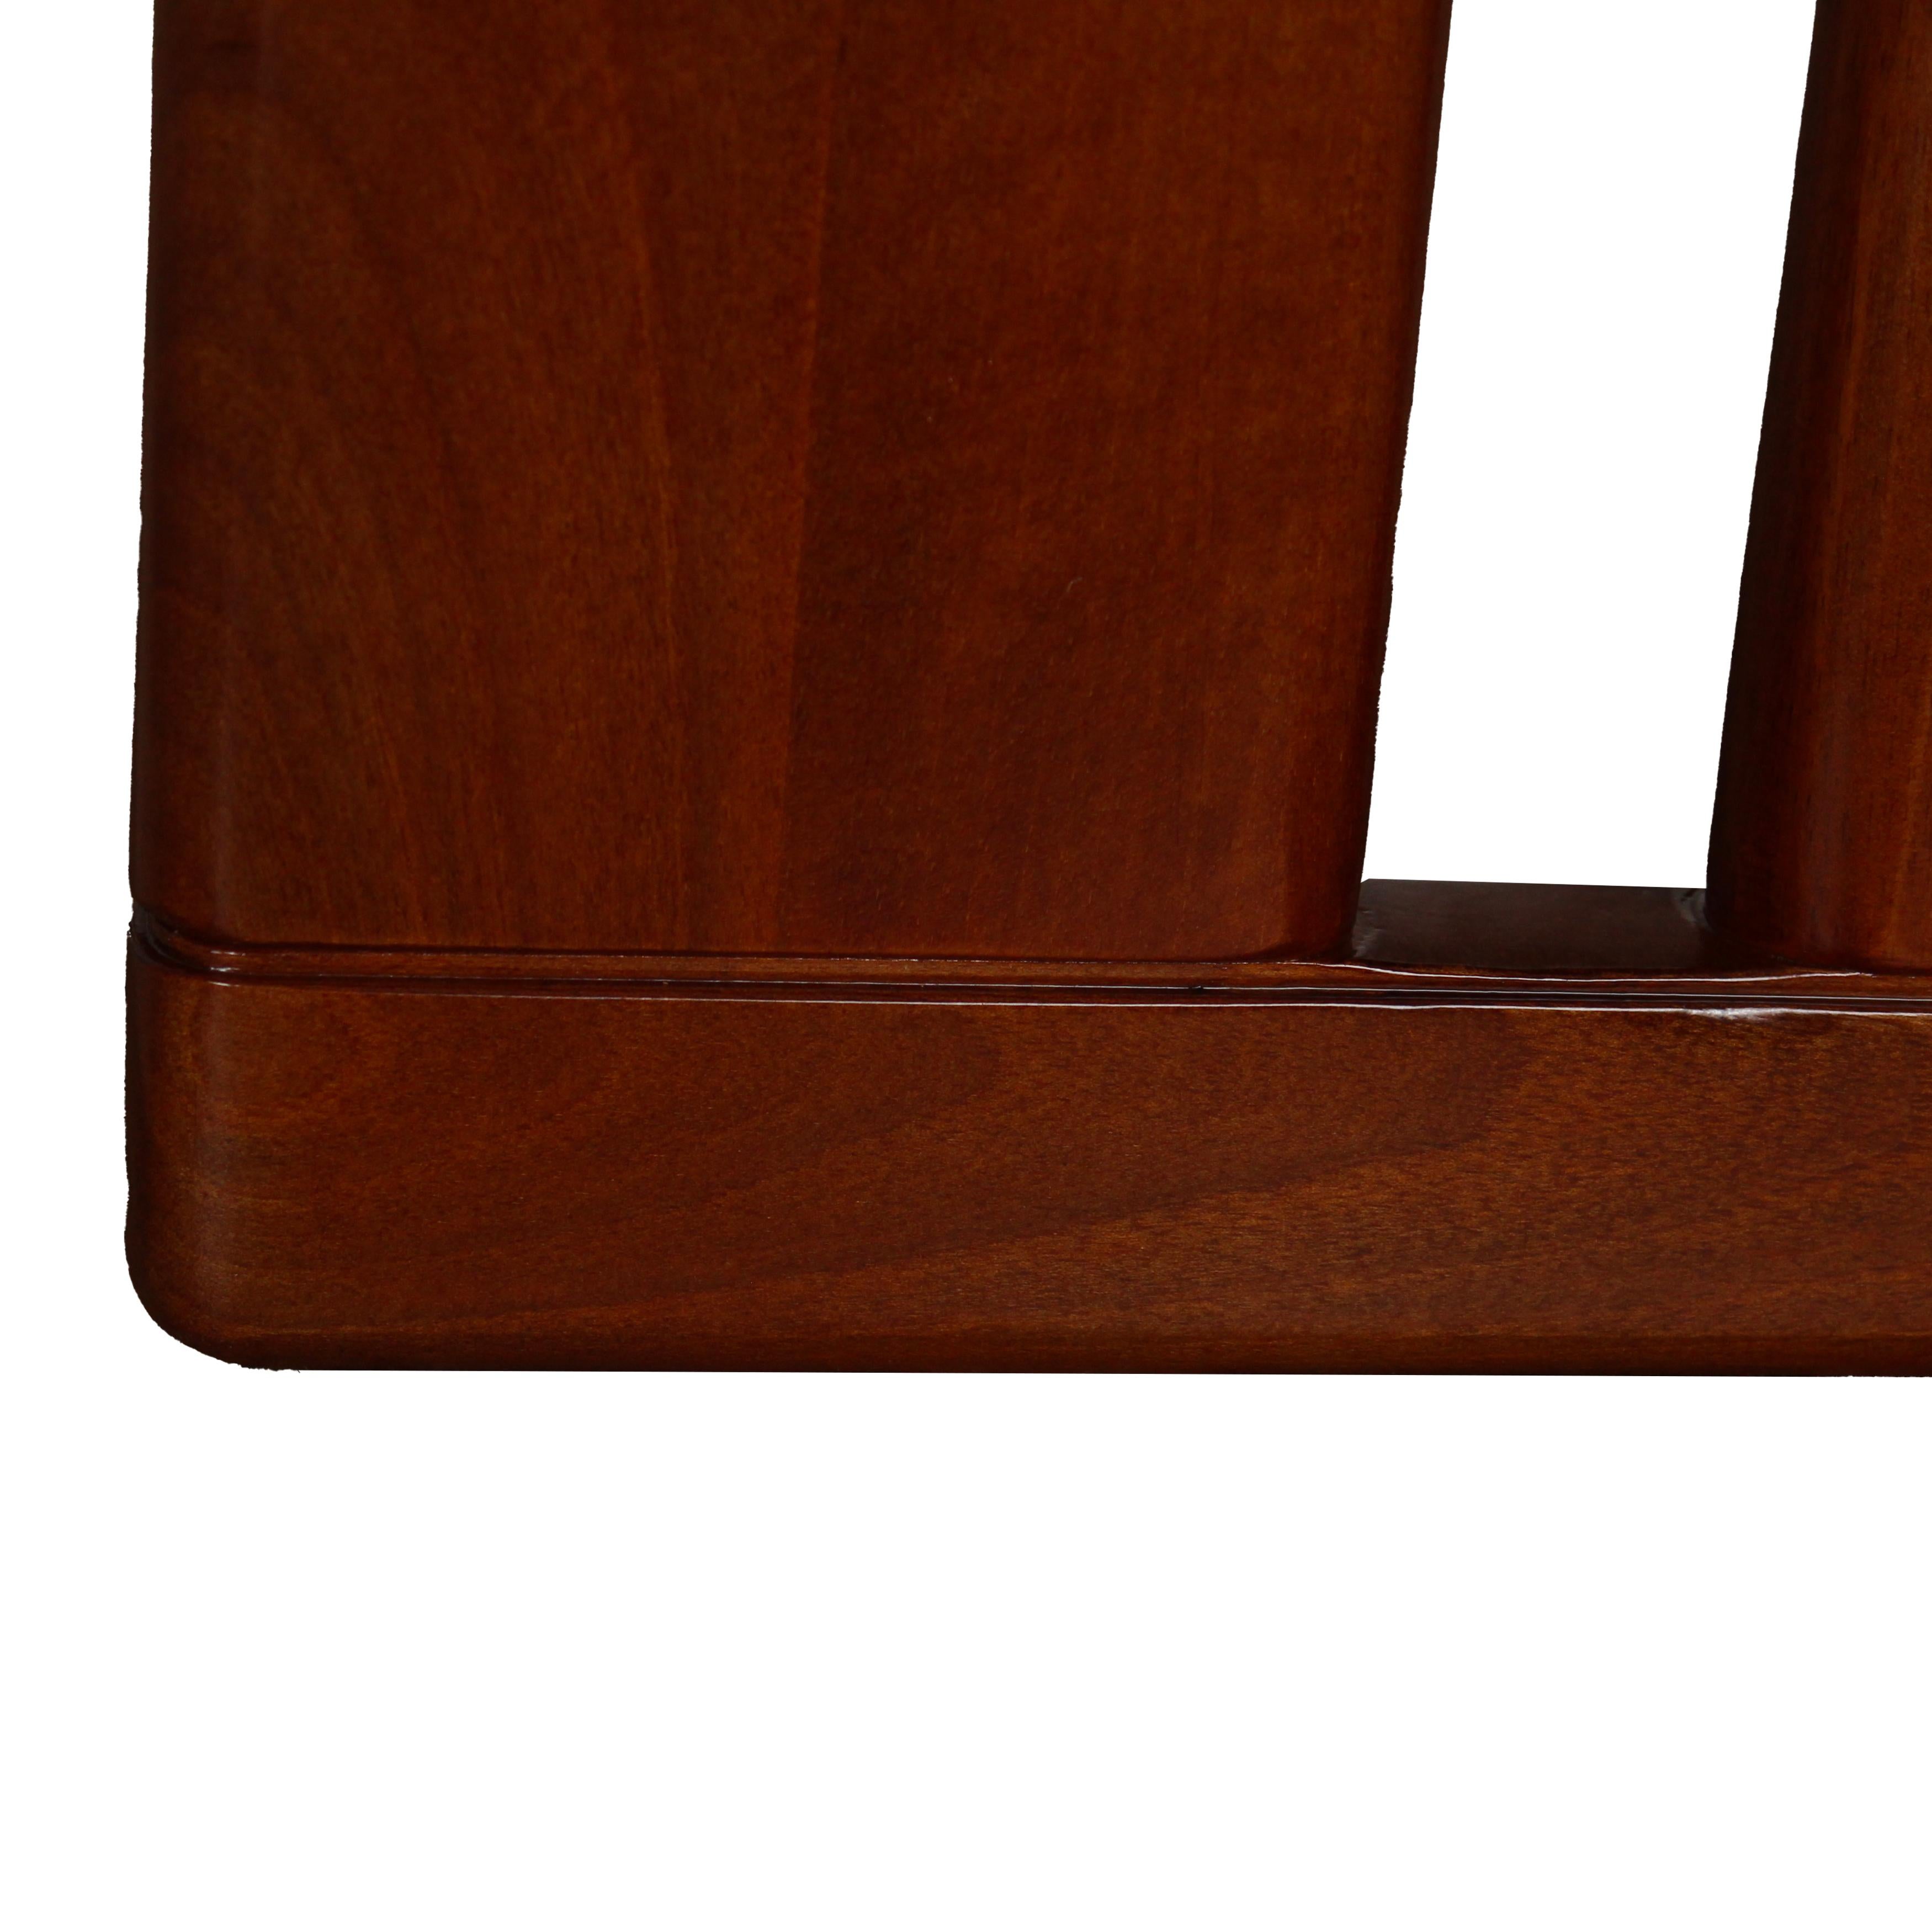 Mario Marenco Walnut Sapporo Dining Chairs for Mobilgirgi, 1970s, Set of 8 For Sale 13